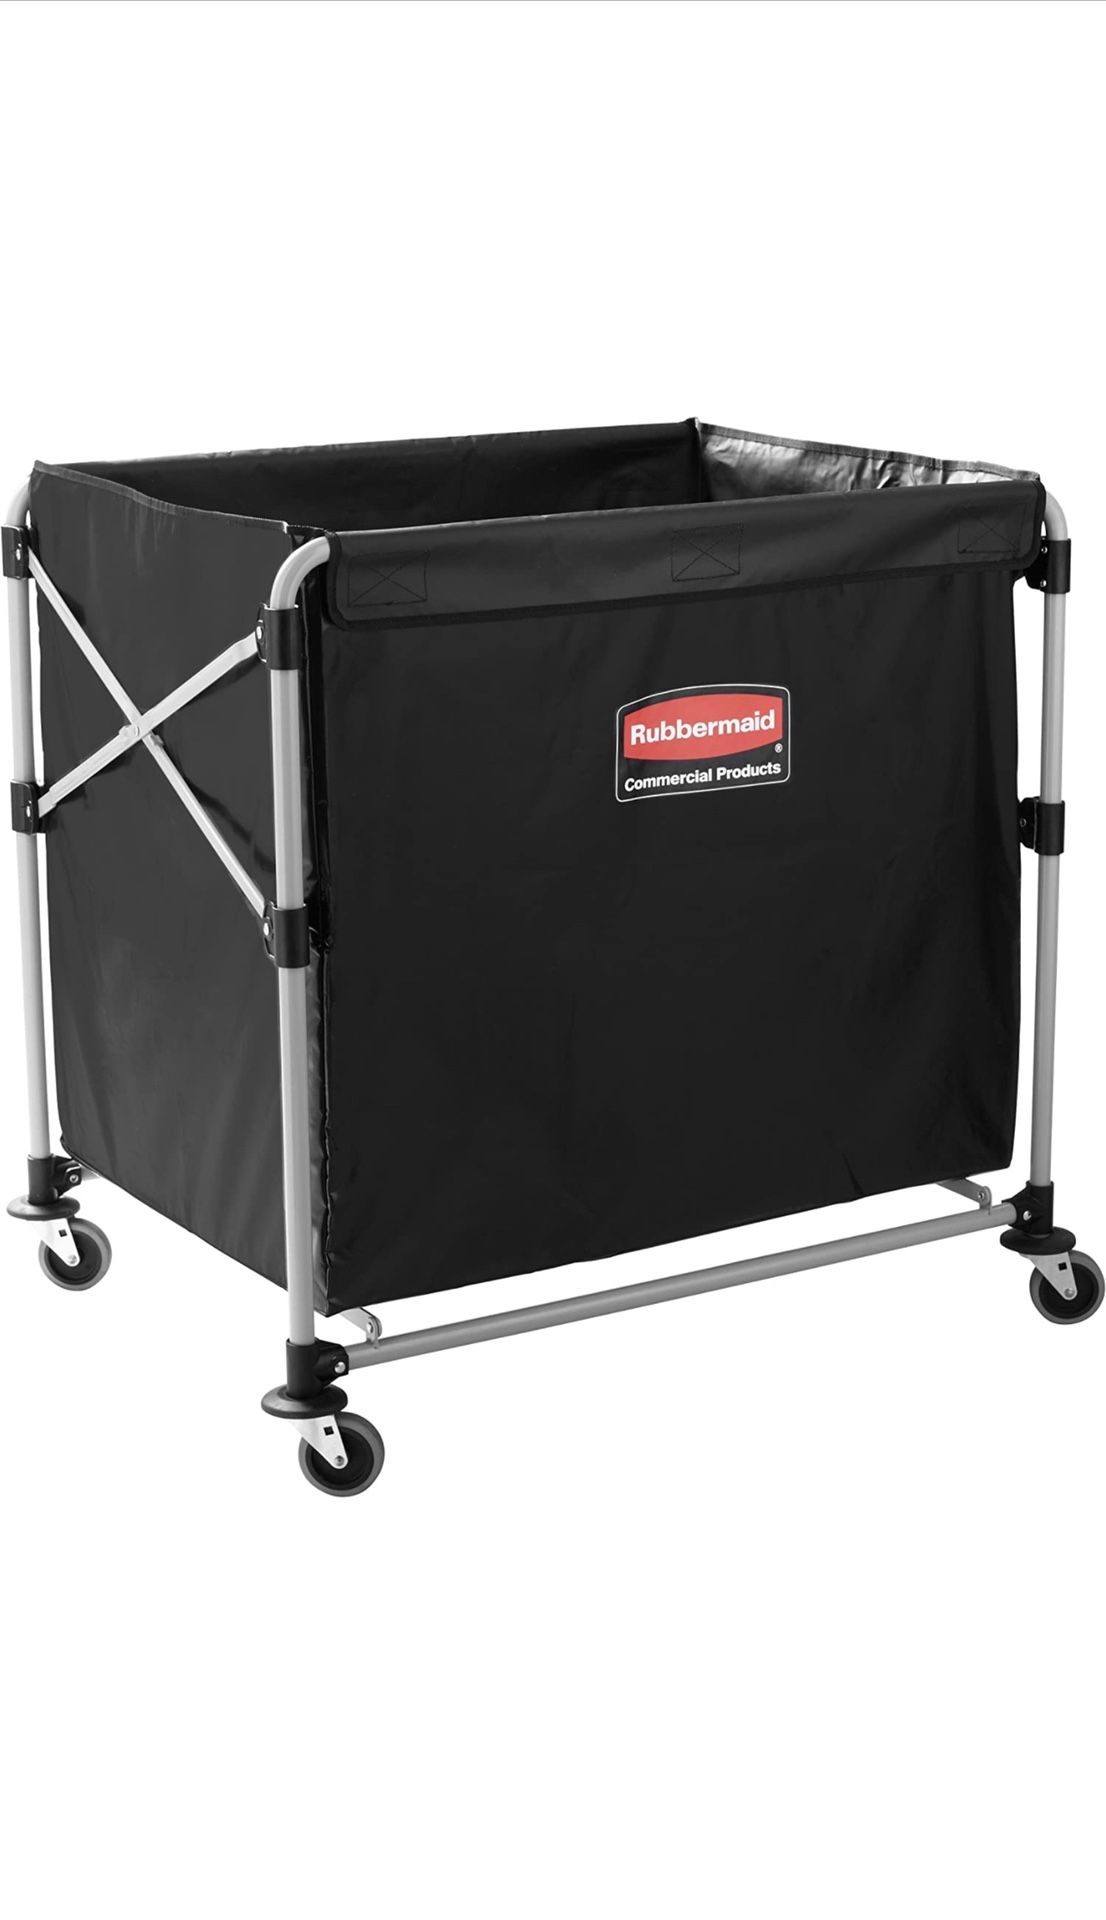 Rubbermaid Commercial Products, Collapsible X Cart Laundy Cart, College Move-In, Transport Supplies and Groceries, Steel, 8 Bushel (300 L) Cart, 36" L